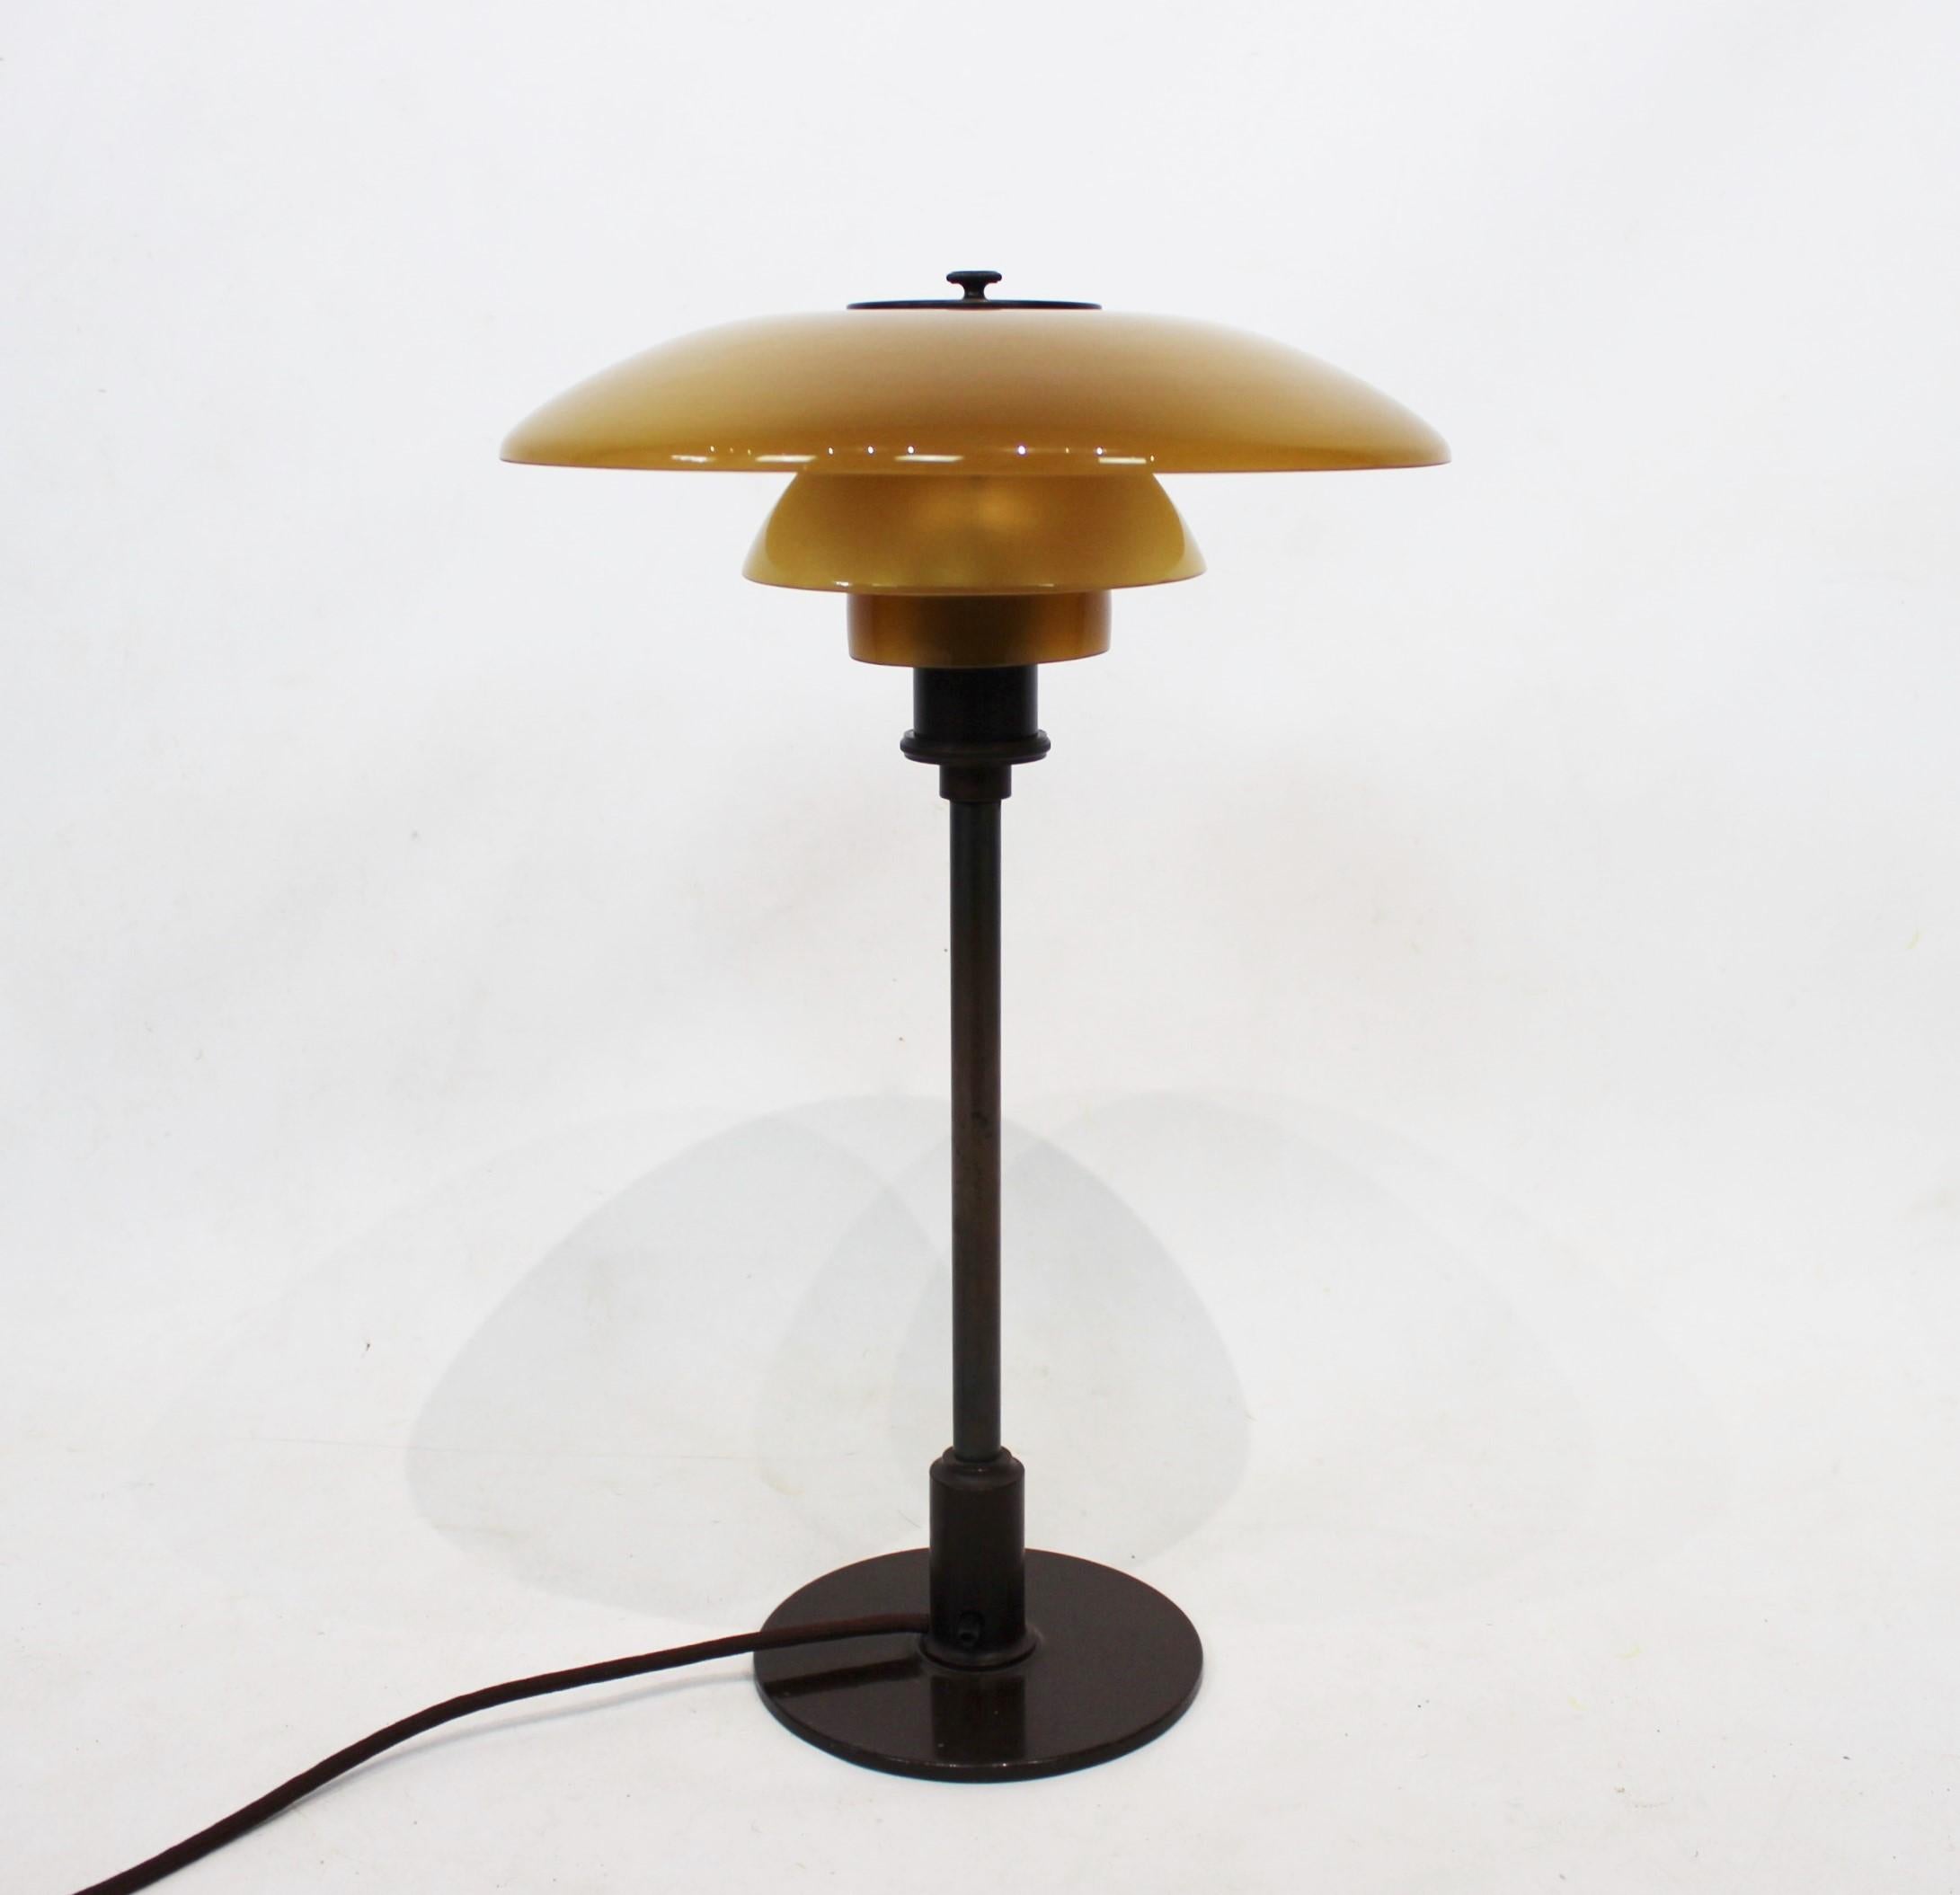 Danish PH 3/2 Tablelamp with Shades of Amber Colored Glass, 1930s